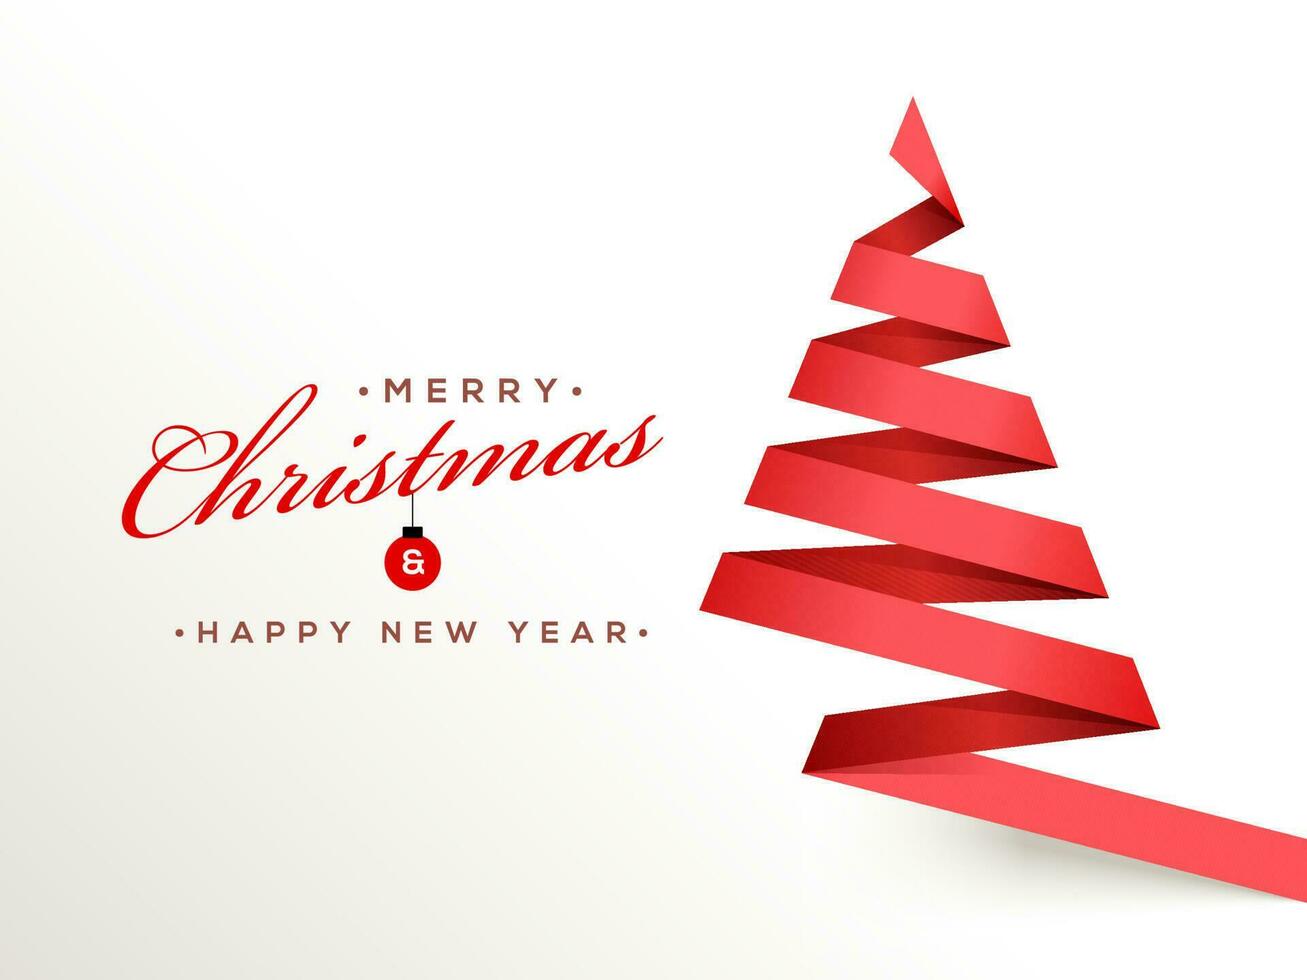 Merry Christmas and Happy New Year celebration greeting card design with xmas tree made by red ribbon on white background. vector